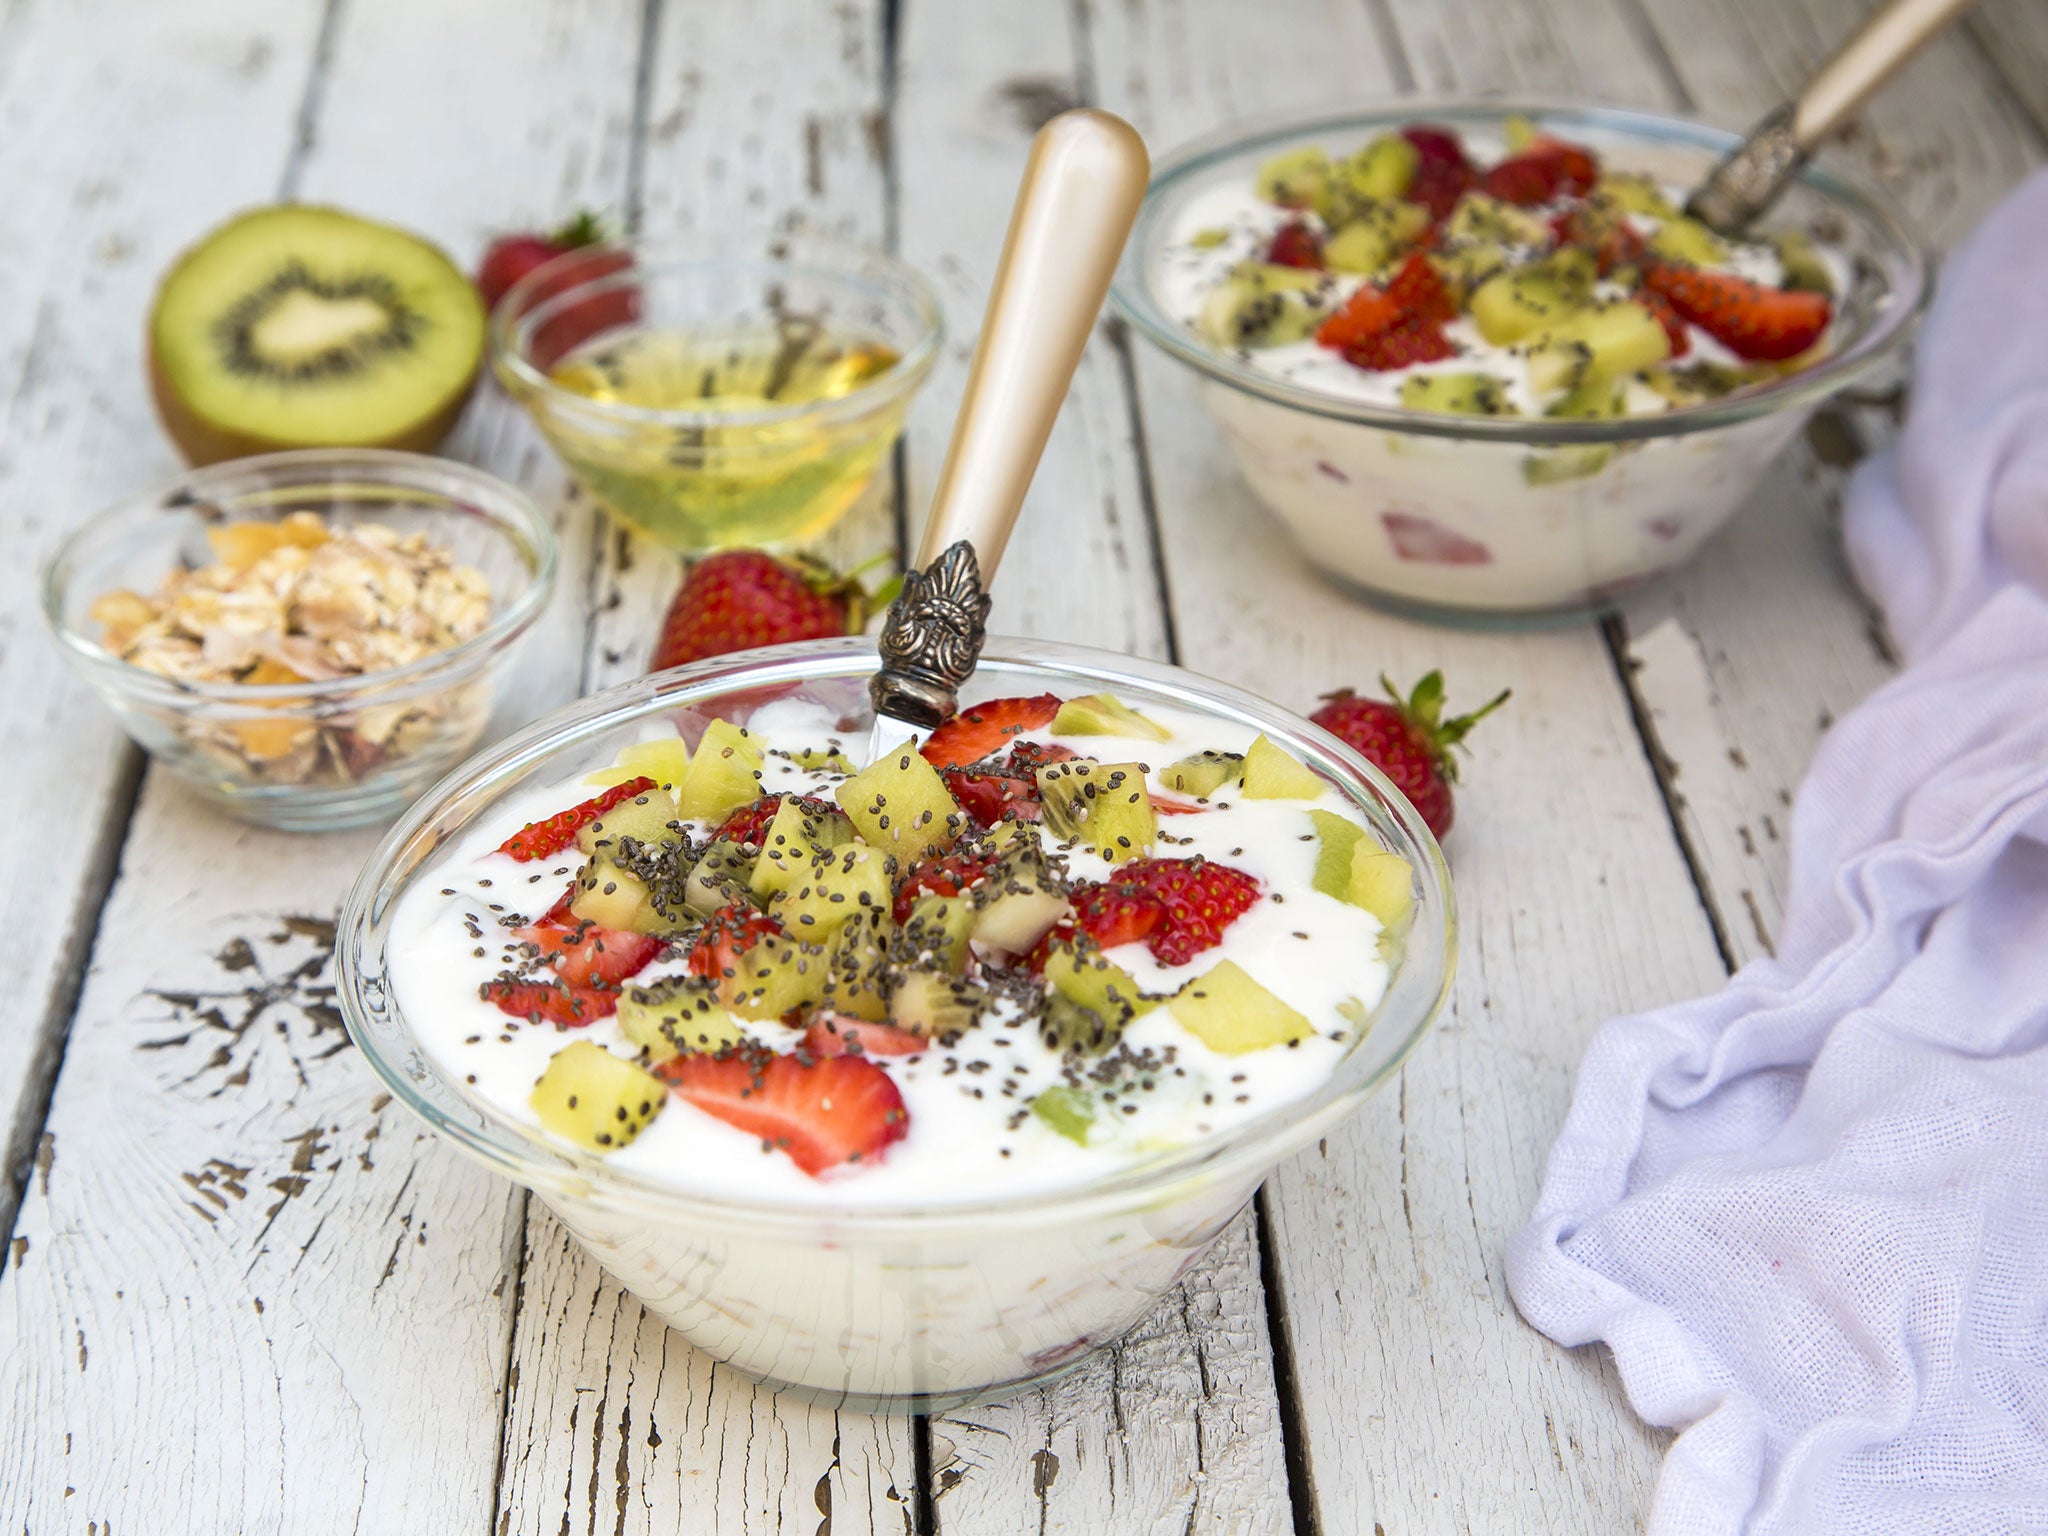 Experts recommend eating yogurt for breakfast